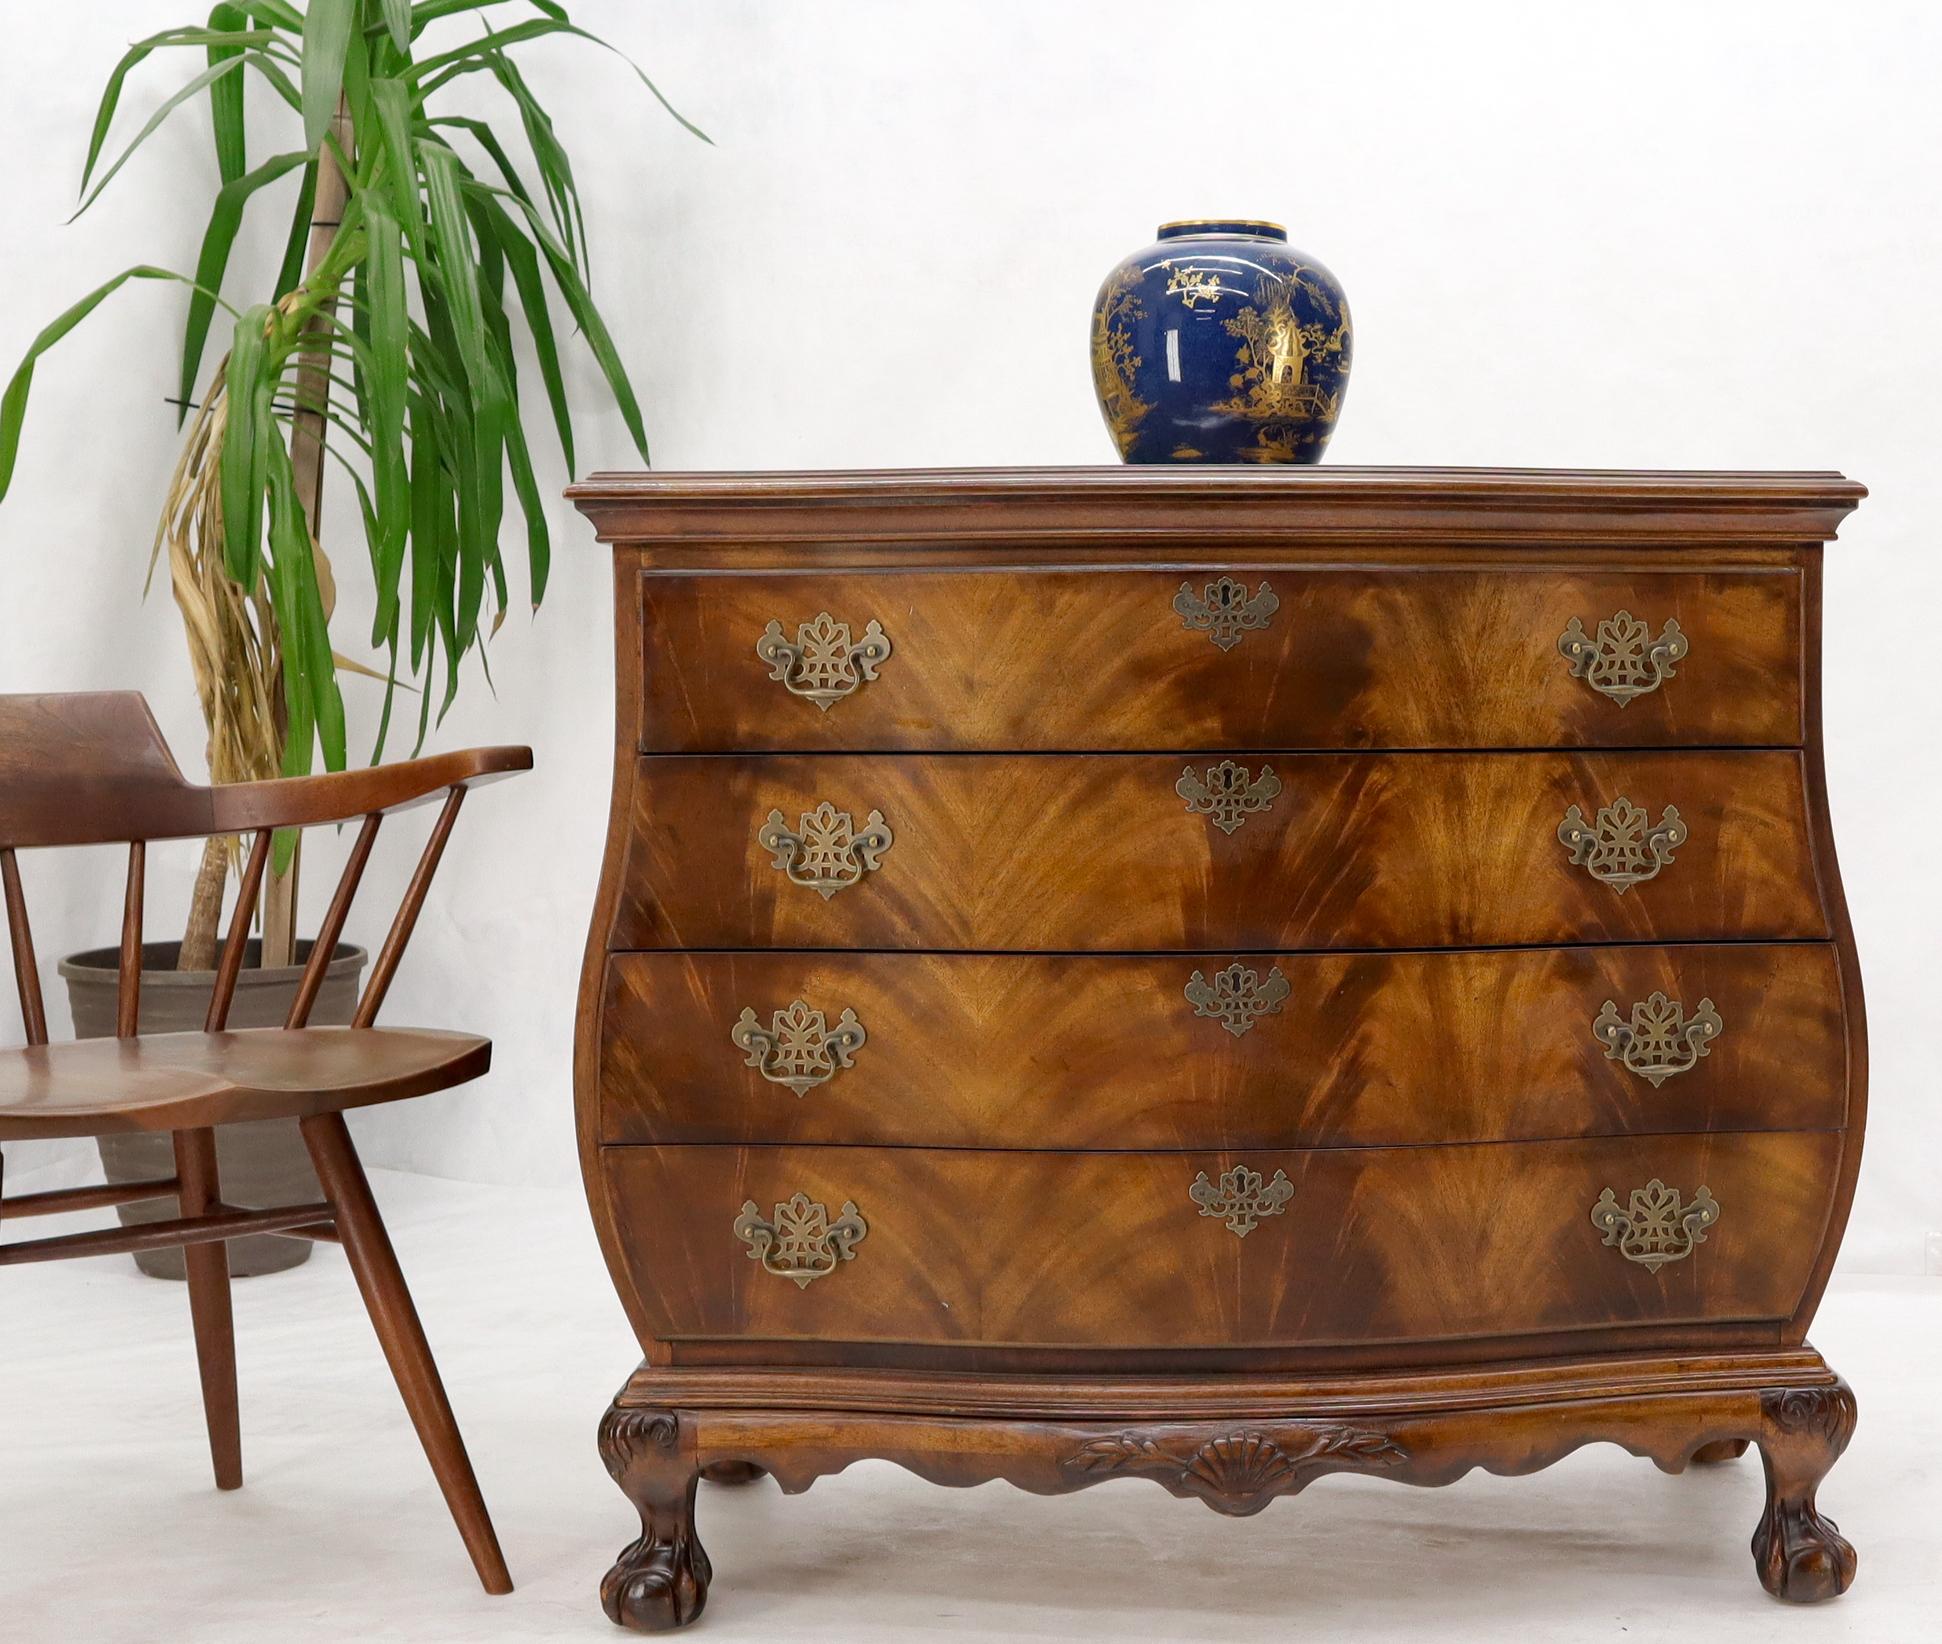 Bombay 4 drawers flame mahogany ball and claw feet dresser chest by Drexel. Campaign style 